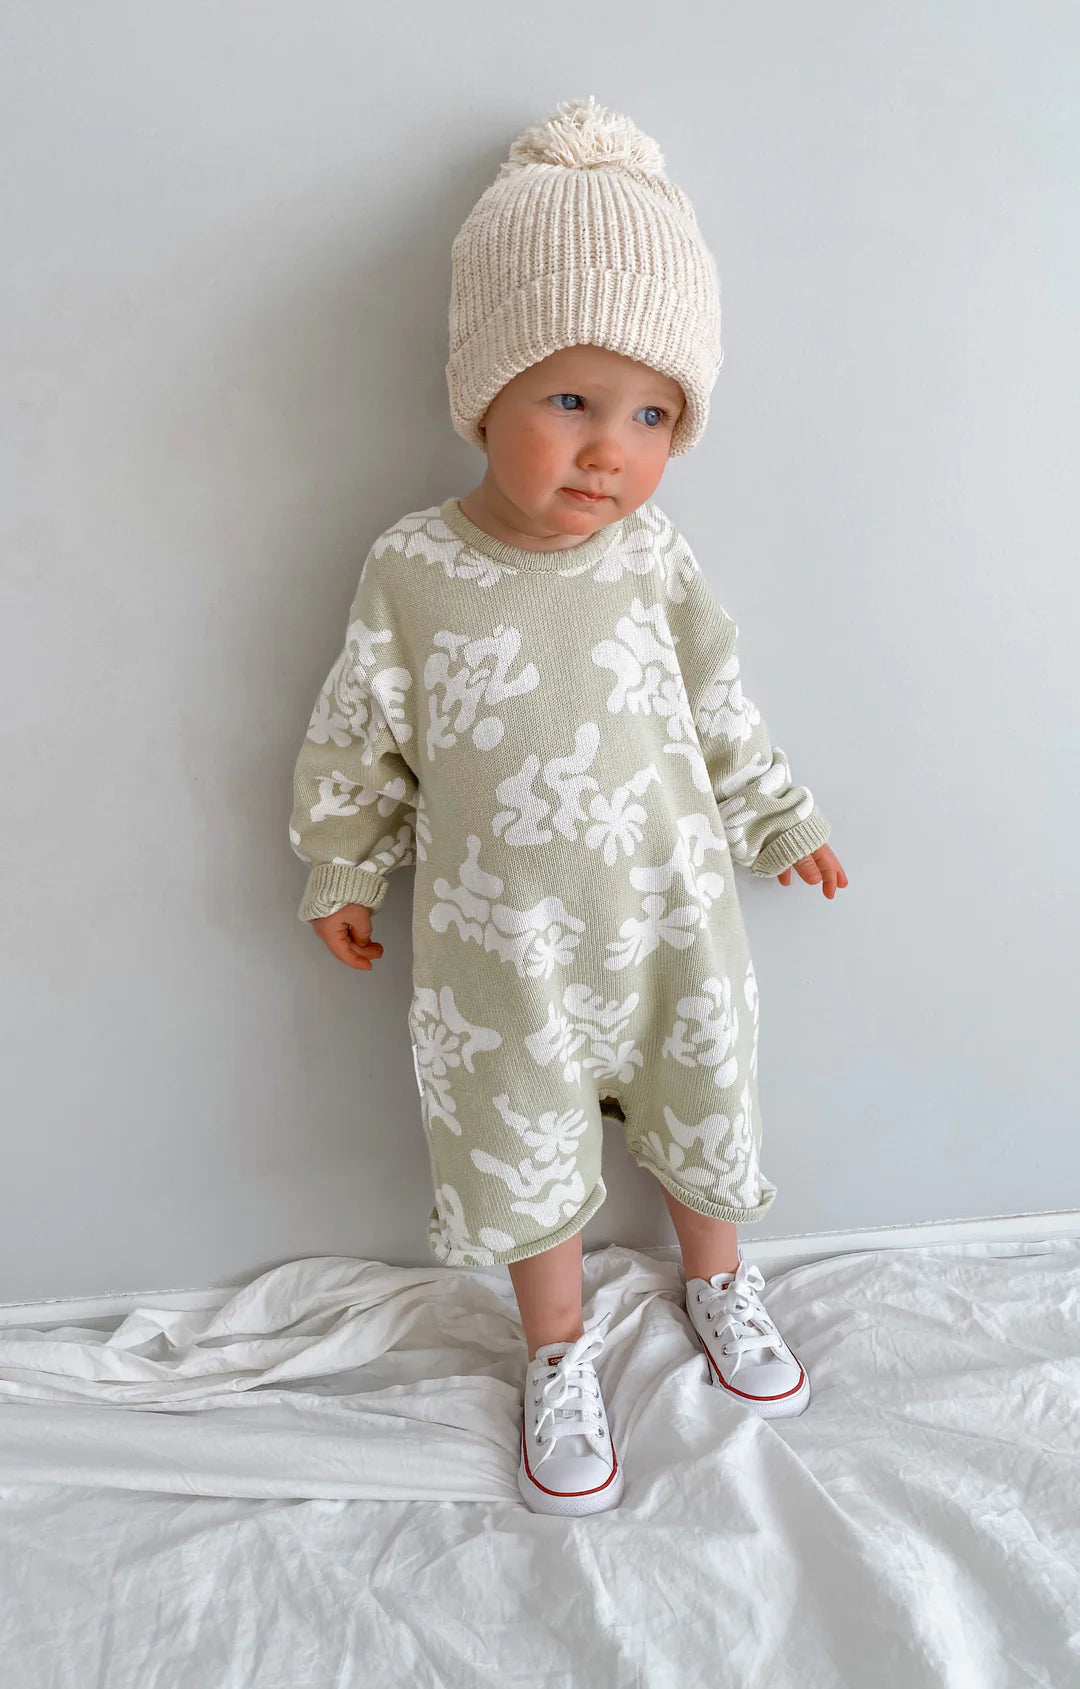 ziggy lou playsuit - angus and dudley